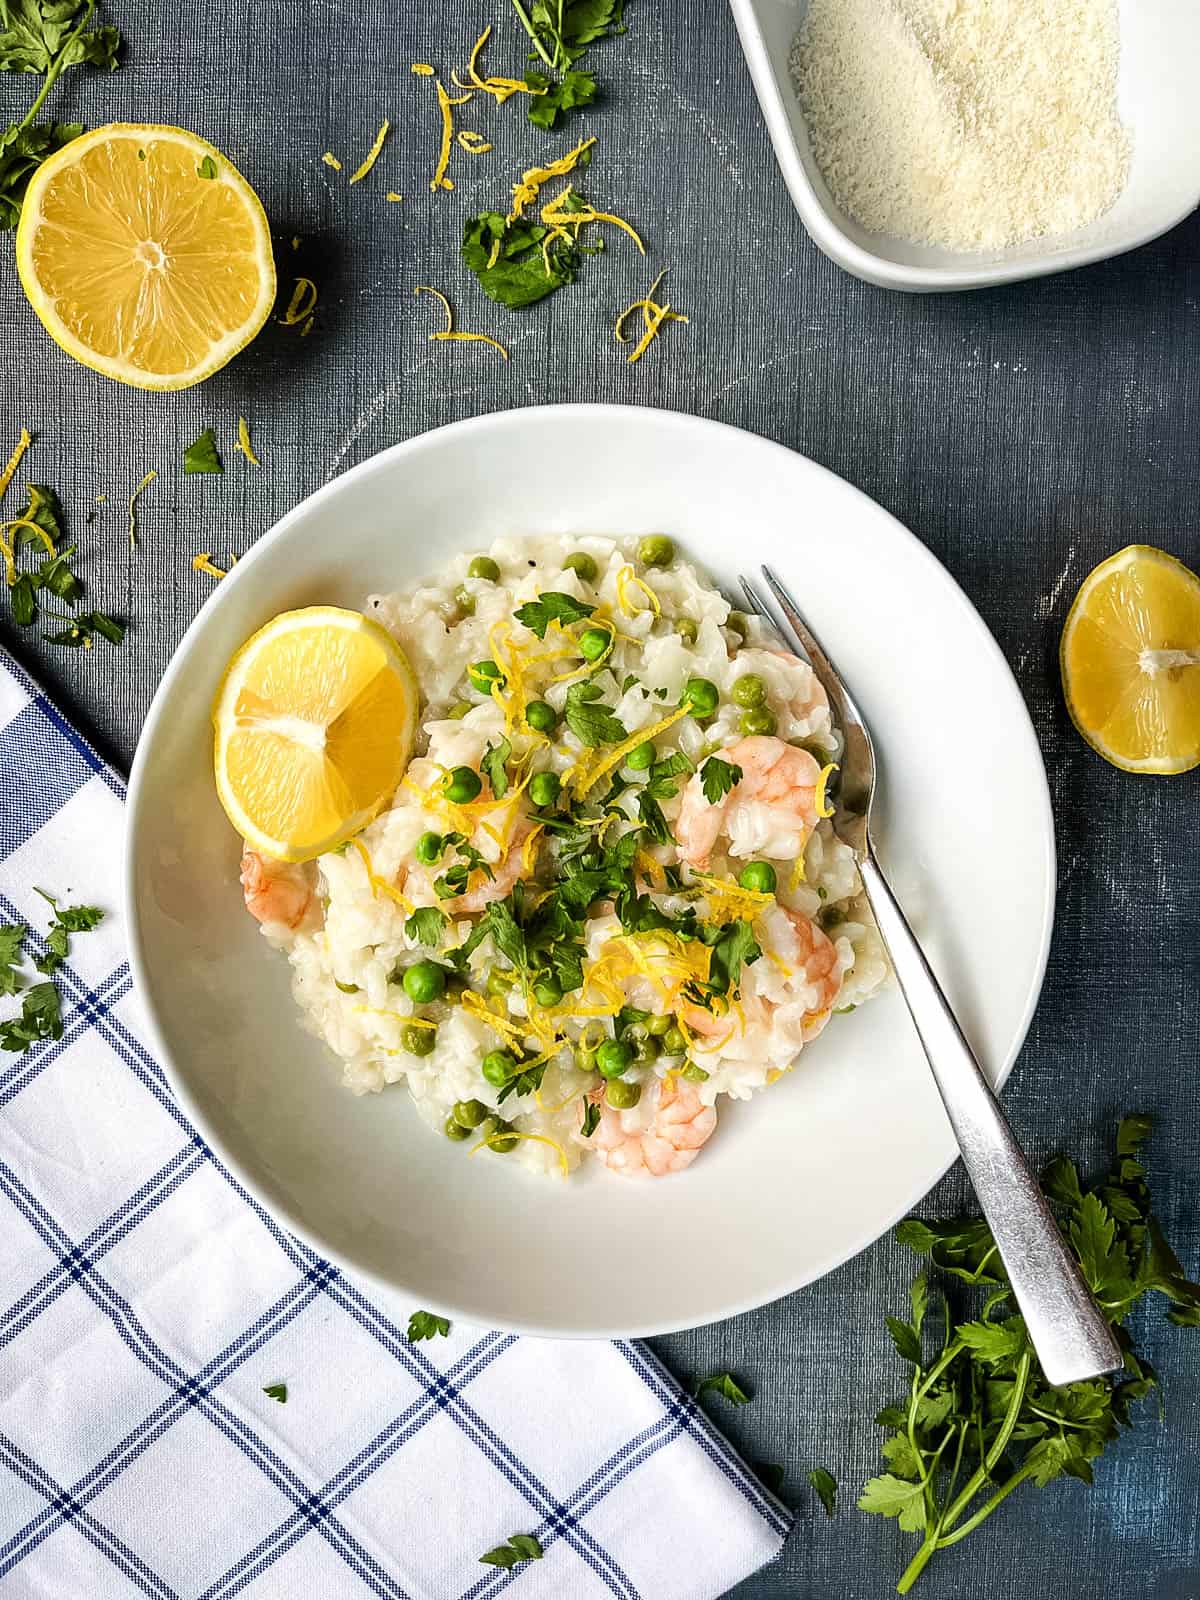 prawn and pea risotto served with lemon and topped with fresh parsley and lemon zest in a bowl.